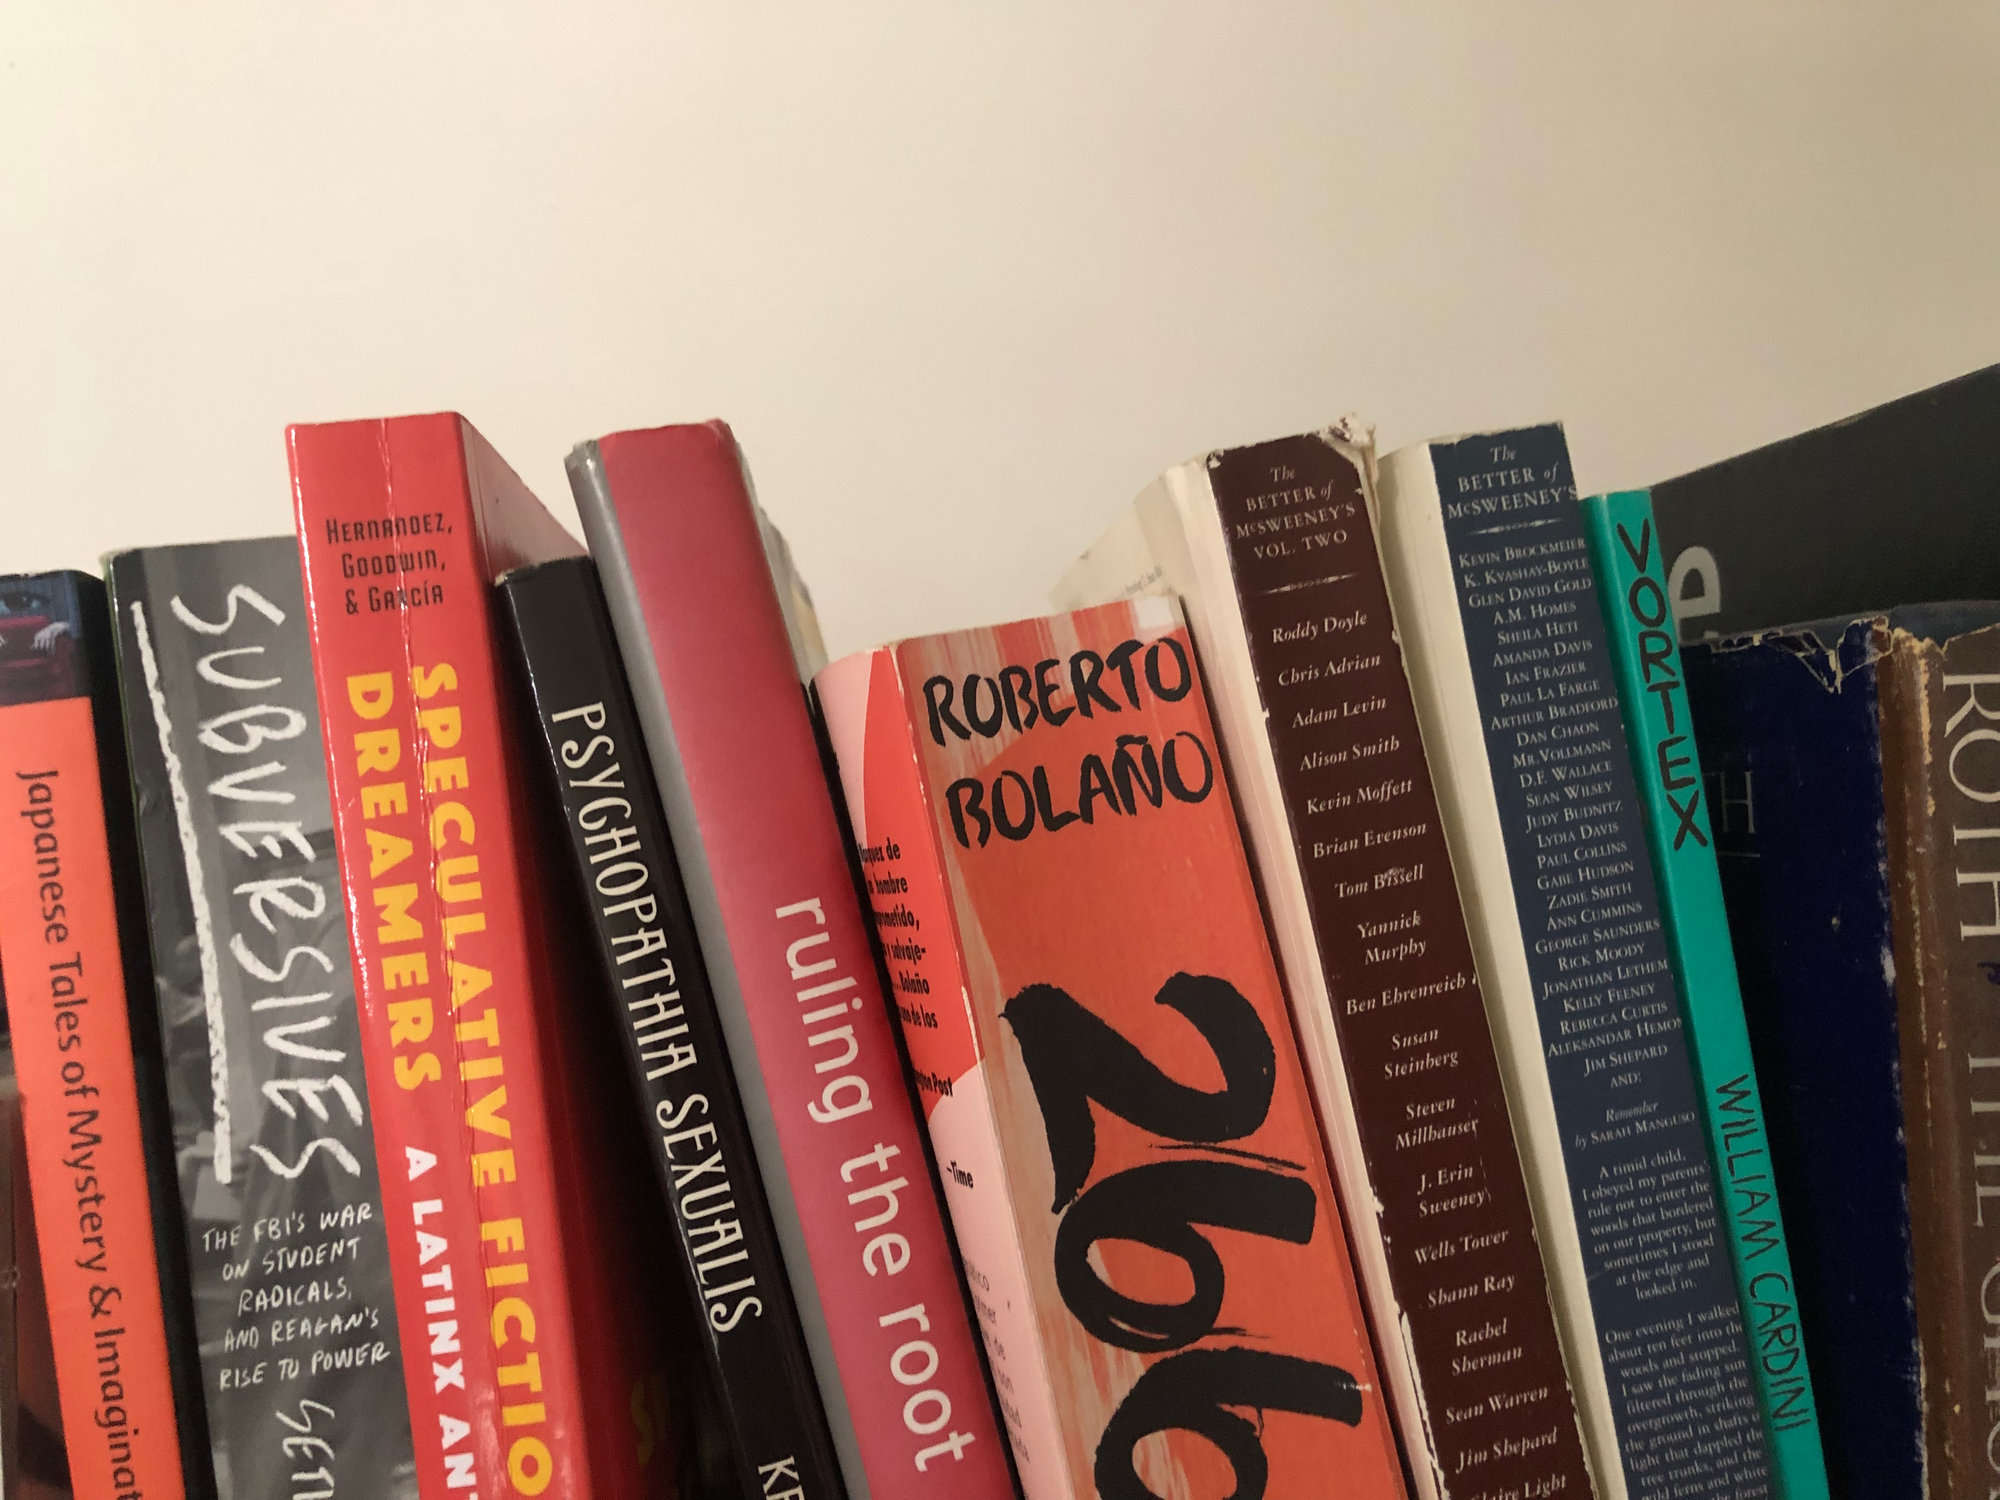 a close-up photo of the tops of spines of a row of books, against a white wall. the readable words on the spines include "Japanese Tales of Mystery & Imagination", "Subversives: The FBI's War on Student Radicals and Reagan's Rise to Power", "Hernandez, Goodwin, & Garcia Speculative Fiction Dreamers A Latinx", "Psychopathia Sexualis", "Ruling the Root", "Roberto Bolaño 266" "The Better of McSweeney's Vol. Two", "The Better of McSweeney's", "Vortex William Cardini" and "Roth". taken at the robledo art, strike! headquarters, february 2023.